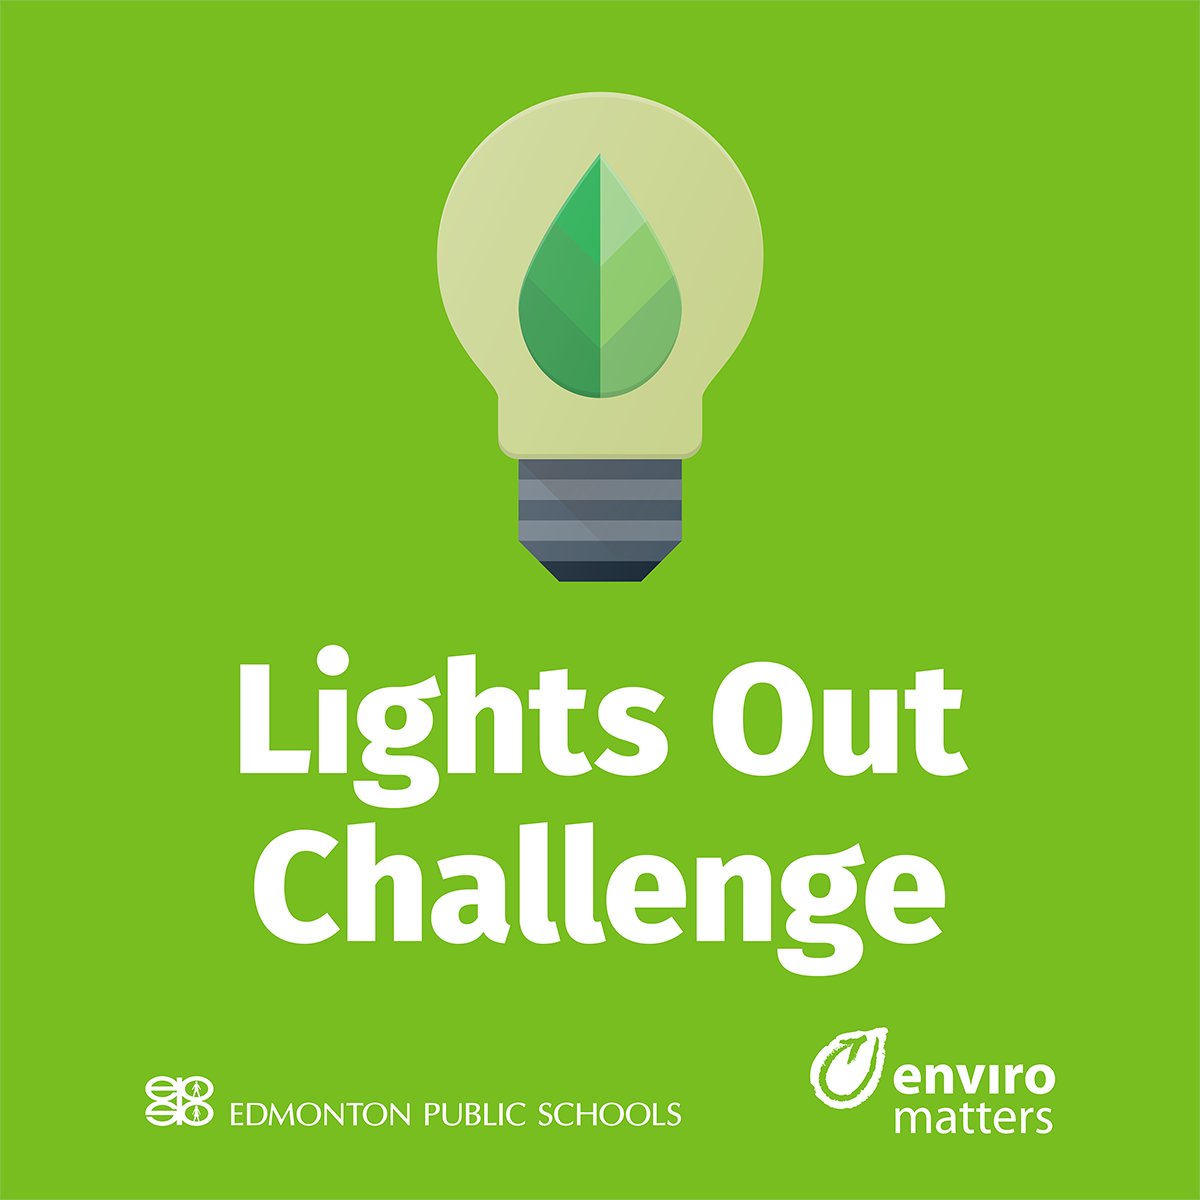 Last month, #EPSB participated in a Lights Out Challenge to shine a spotlight on simple ways we can make positive environmental changes. We helped avoid nearly 1 tonne of CO2e emissions that day! You could power an average house in Alberta for nearly three months with that. #yeg